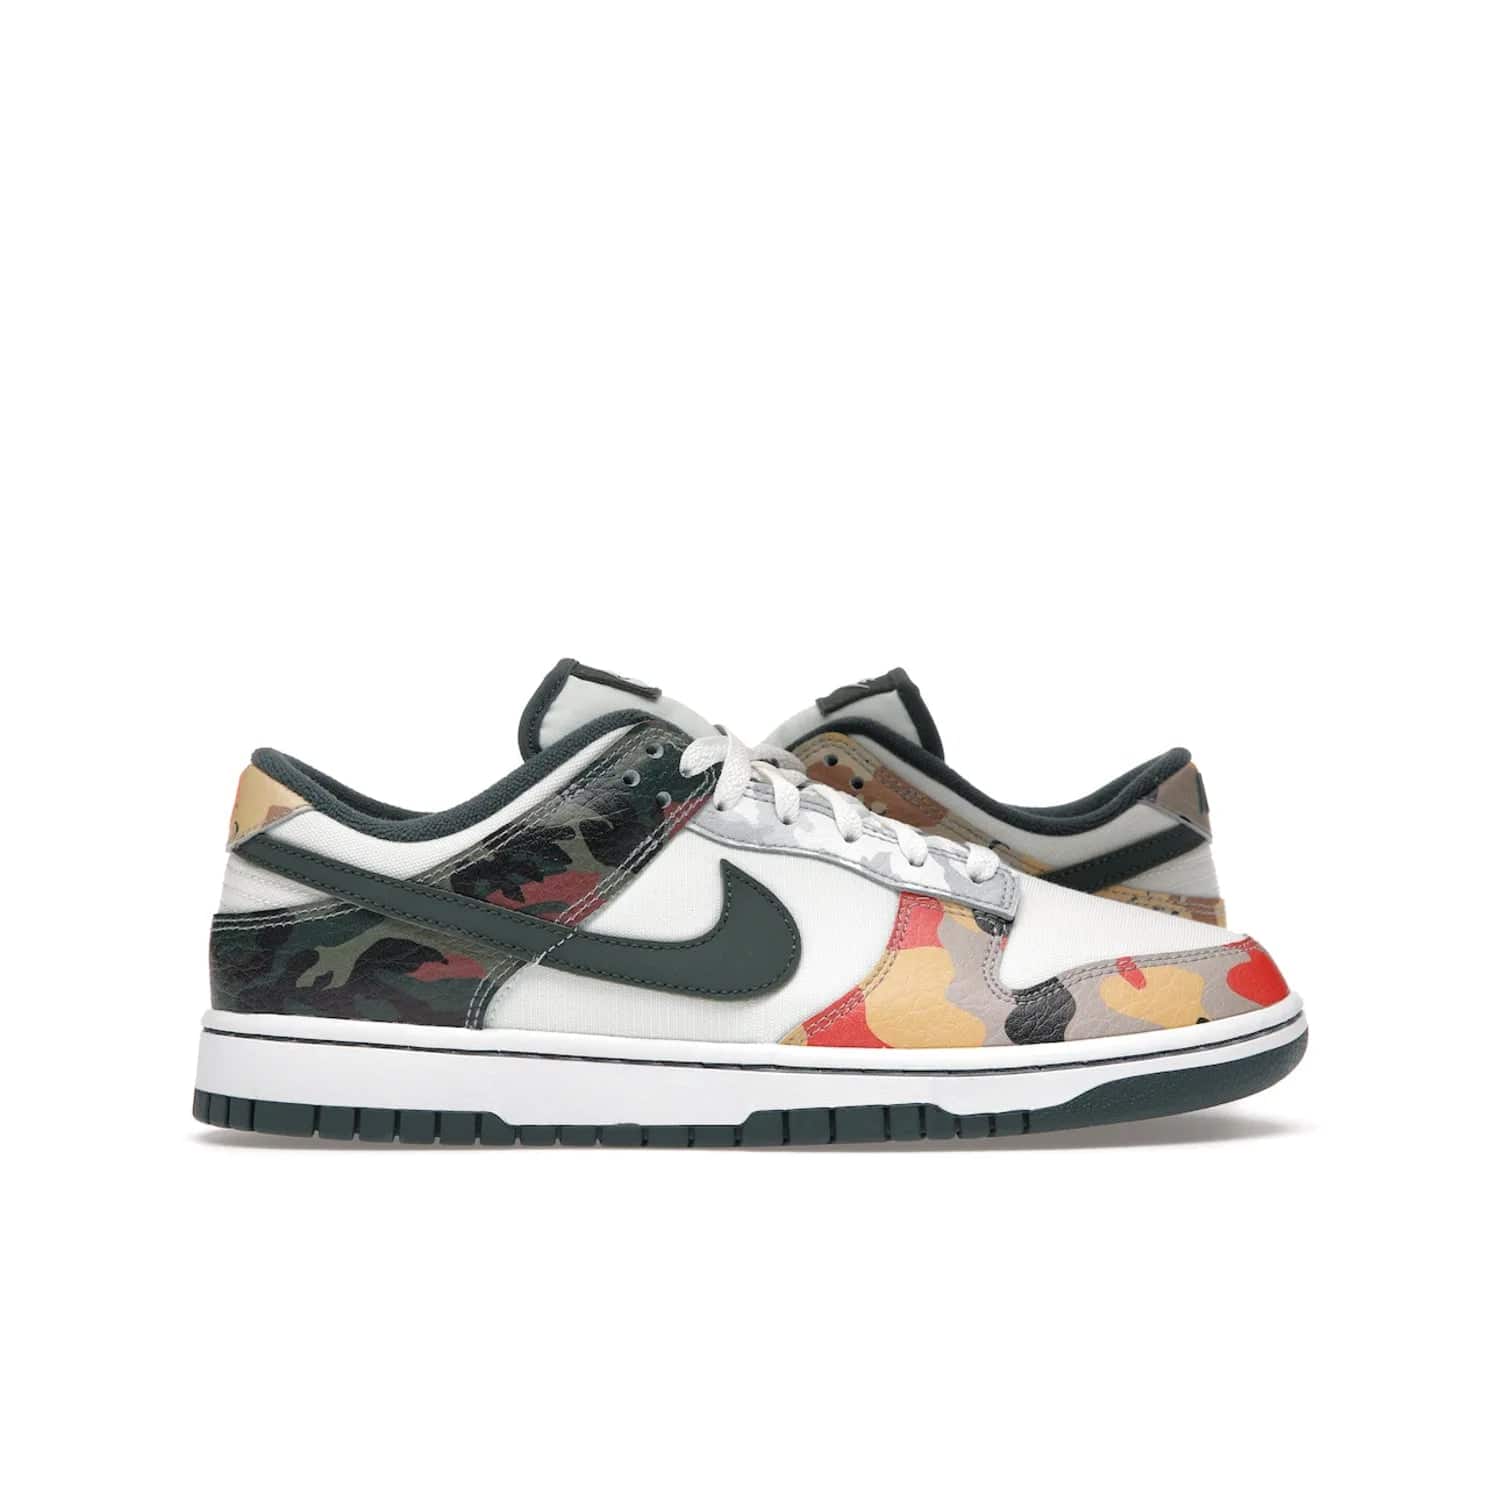 Nike Dunk Low SE Sail Multi-Camo - Image 1 - Only at www.BallersClubKickz.com - Classic design meets statement style in the Nike Dunk Low SE Sail Multi-Camo. White leather base with multi-color camo overlays, vibrant Nike Swooshes, and orange Nike embroidery. Get yours August 2021.